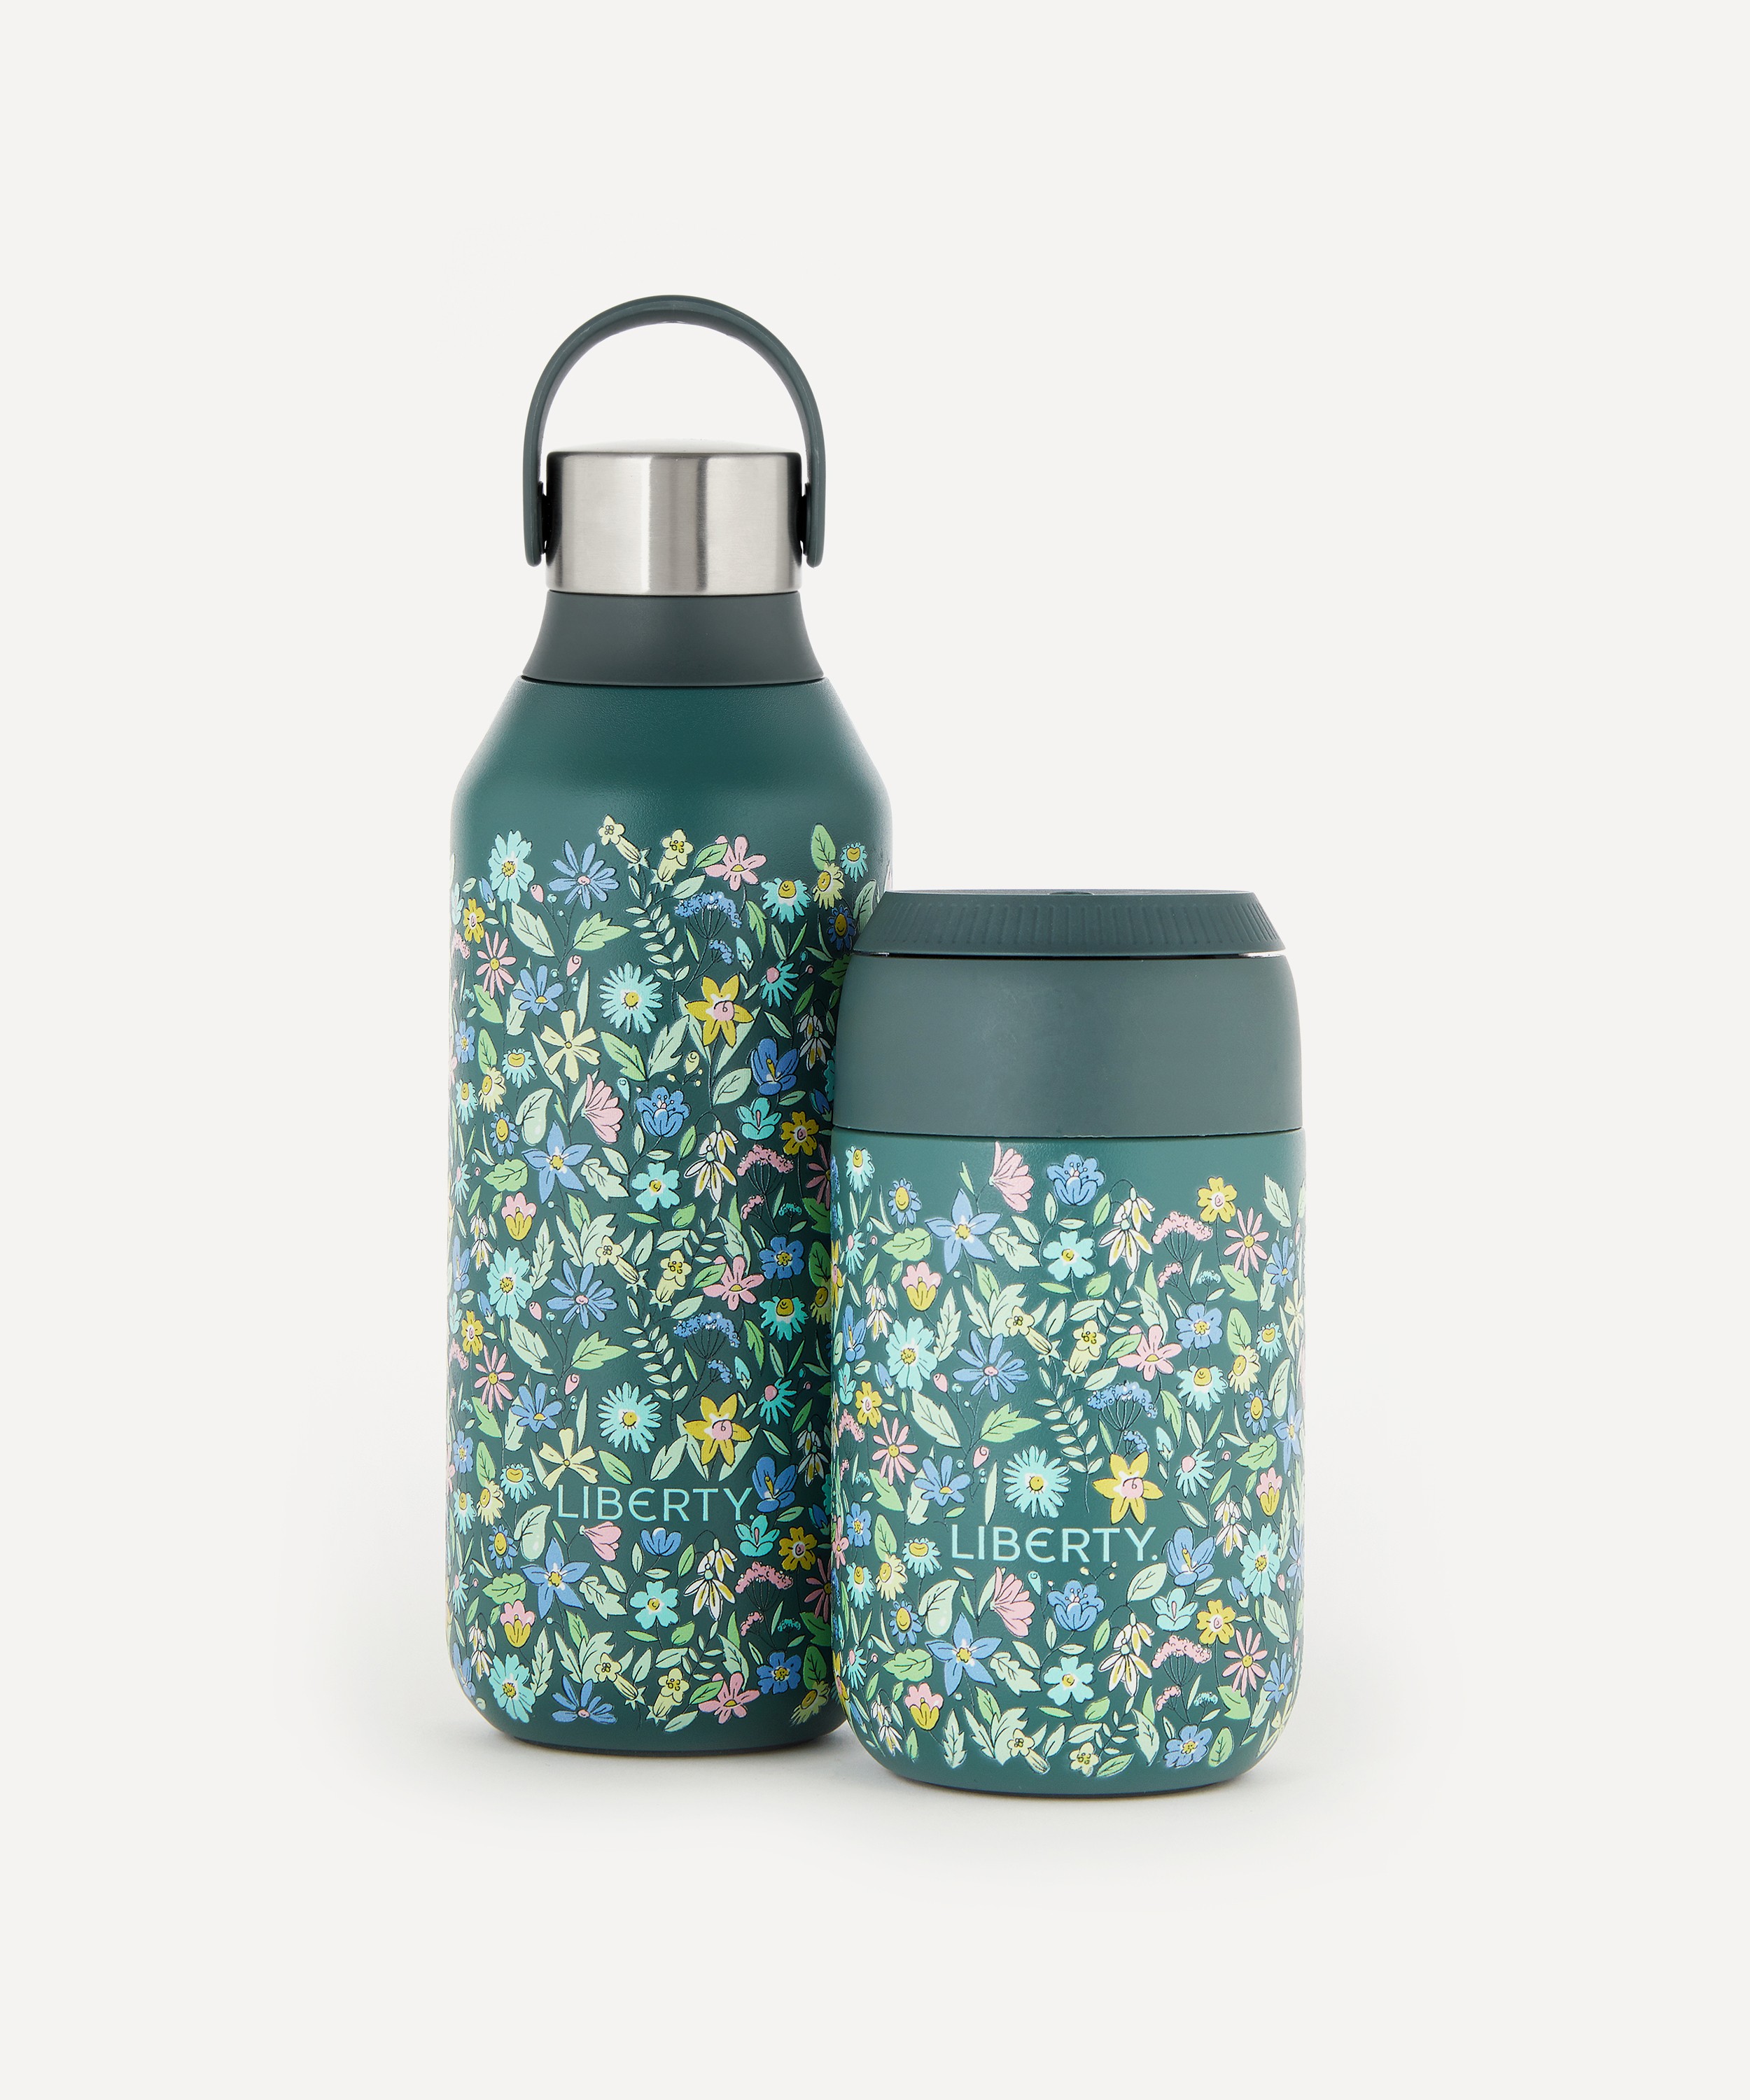 Branded Chilly's Bottle Floral Wild 750ml, Official Chilly's Bottles ::  Promotional Official Chilly's Bottles, Co Branded Chilly's Bottles Printed  With Your Logo, Eco Insulated Vacuum Bottles :: Promotional Products UK